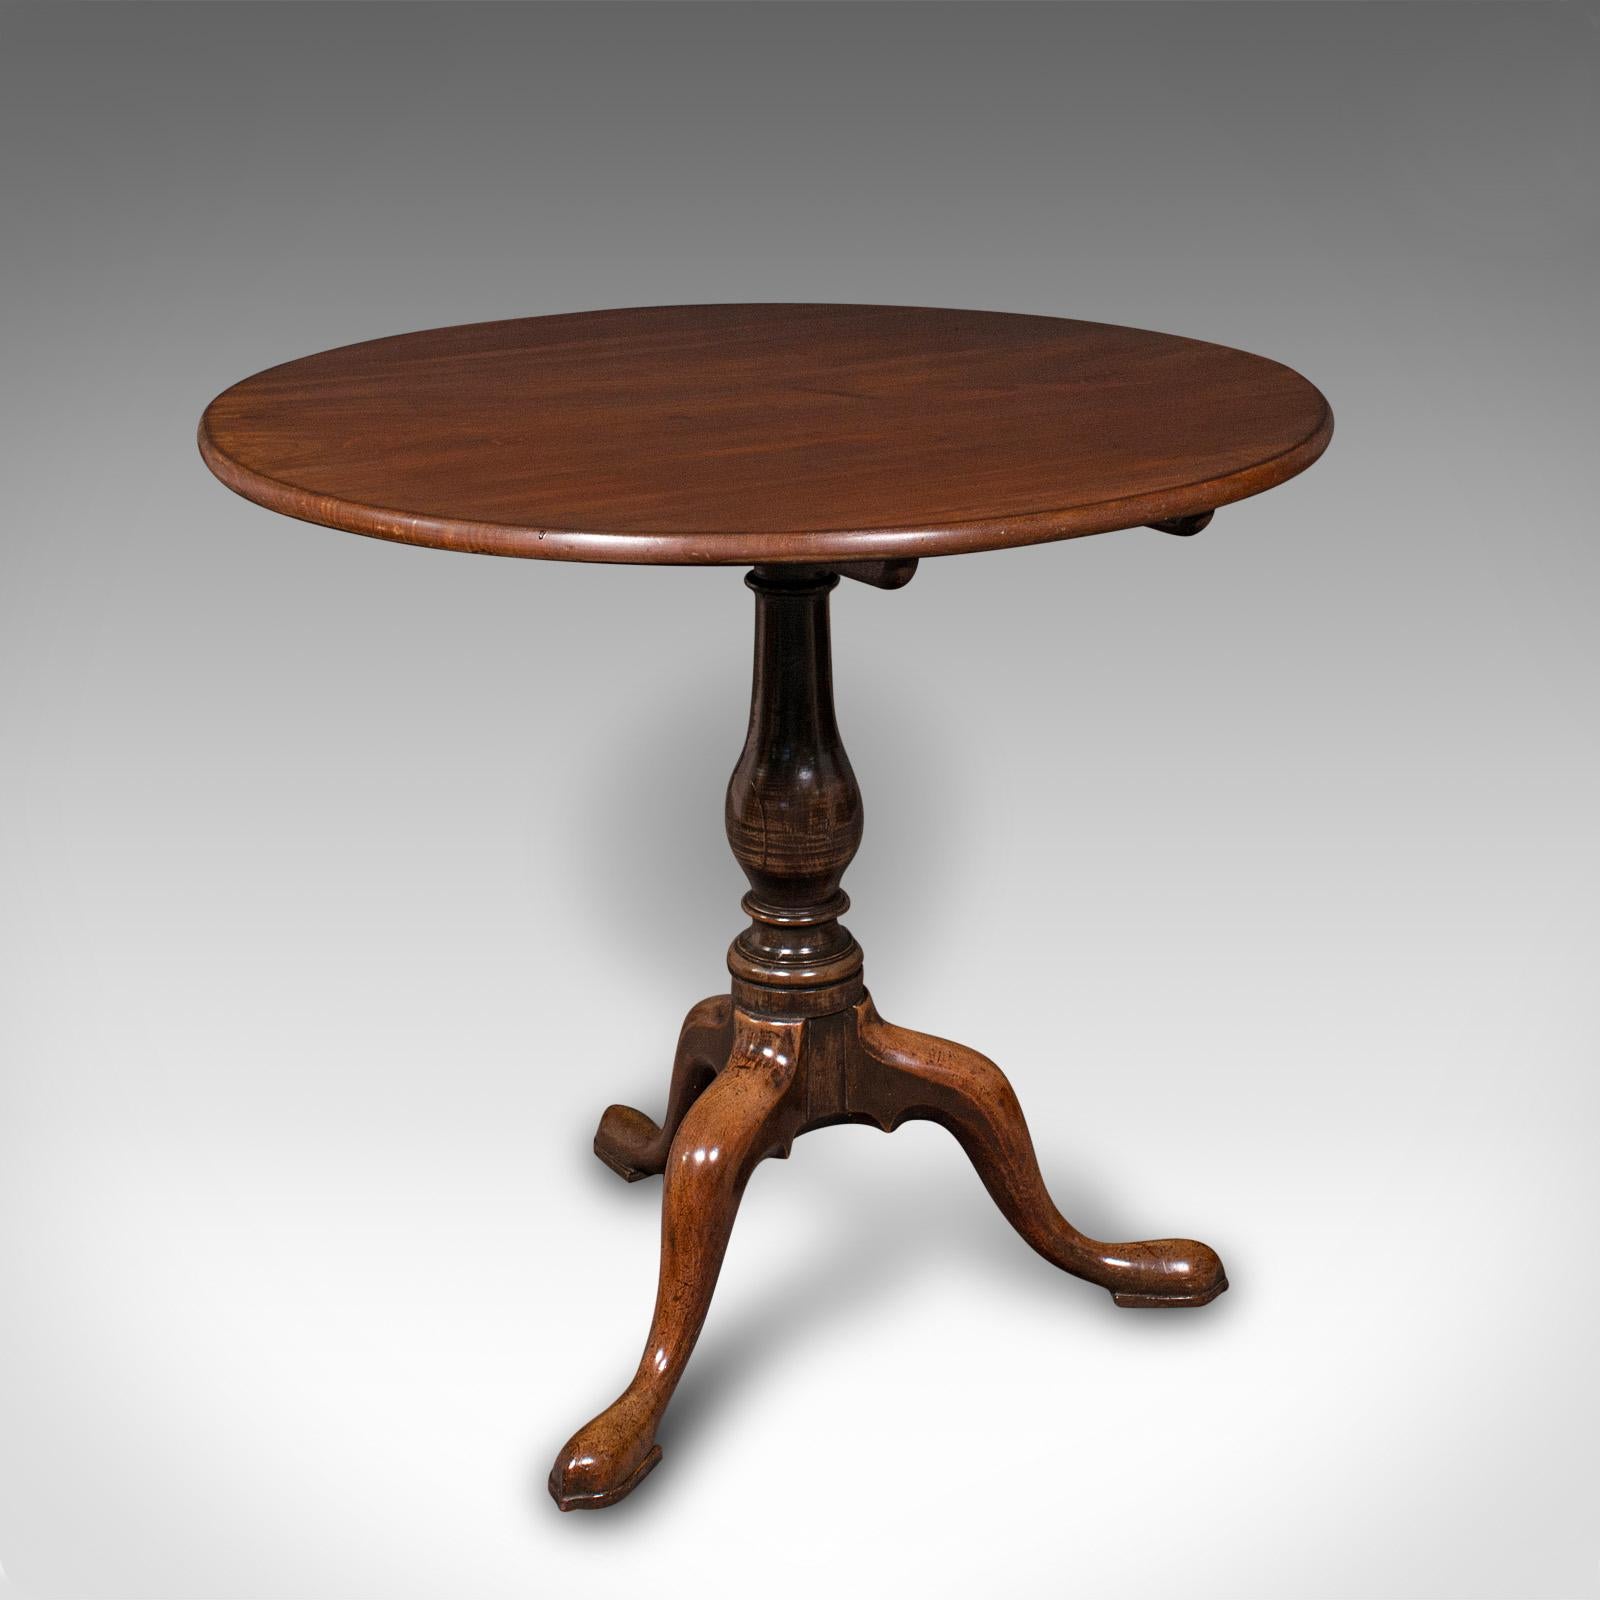 This is an antique tilt top table. An English, mahogany side or lamp table, dating to the late Georgian period, circa 1820.

Generously sized tilting table, with attractive figuring
Displaying a desirable aged patina and in good order
Select stocks